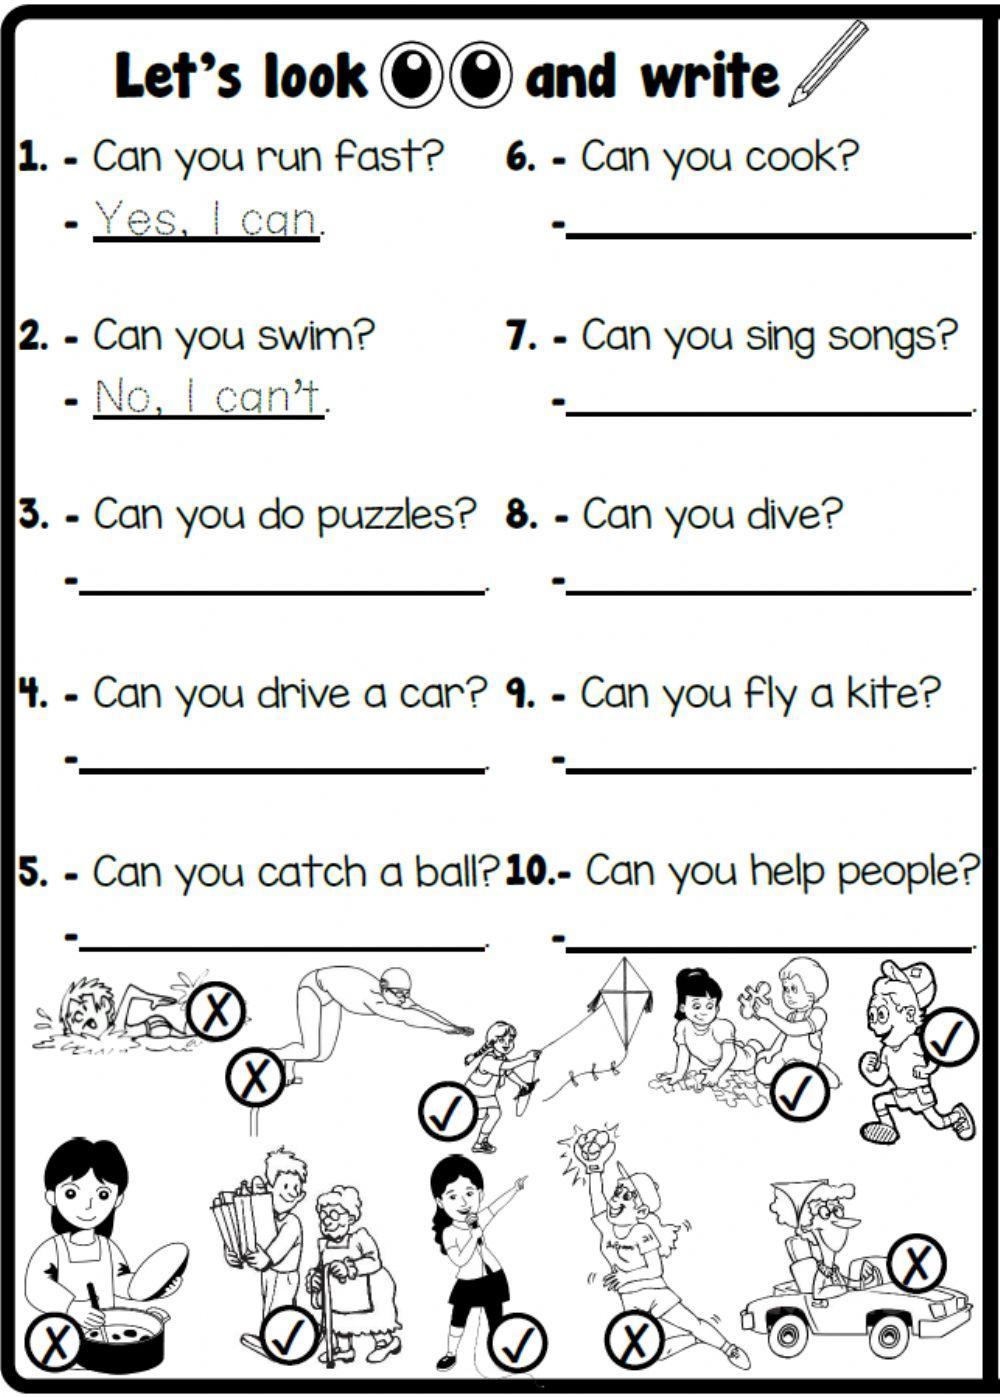 4.3. Cartoon Characters - Action Verbs & Can - Can't